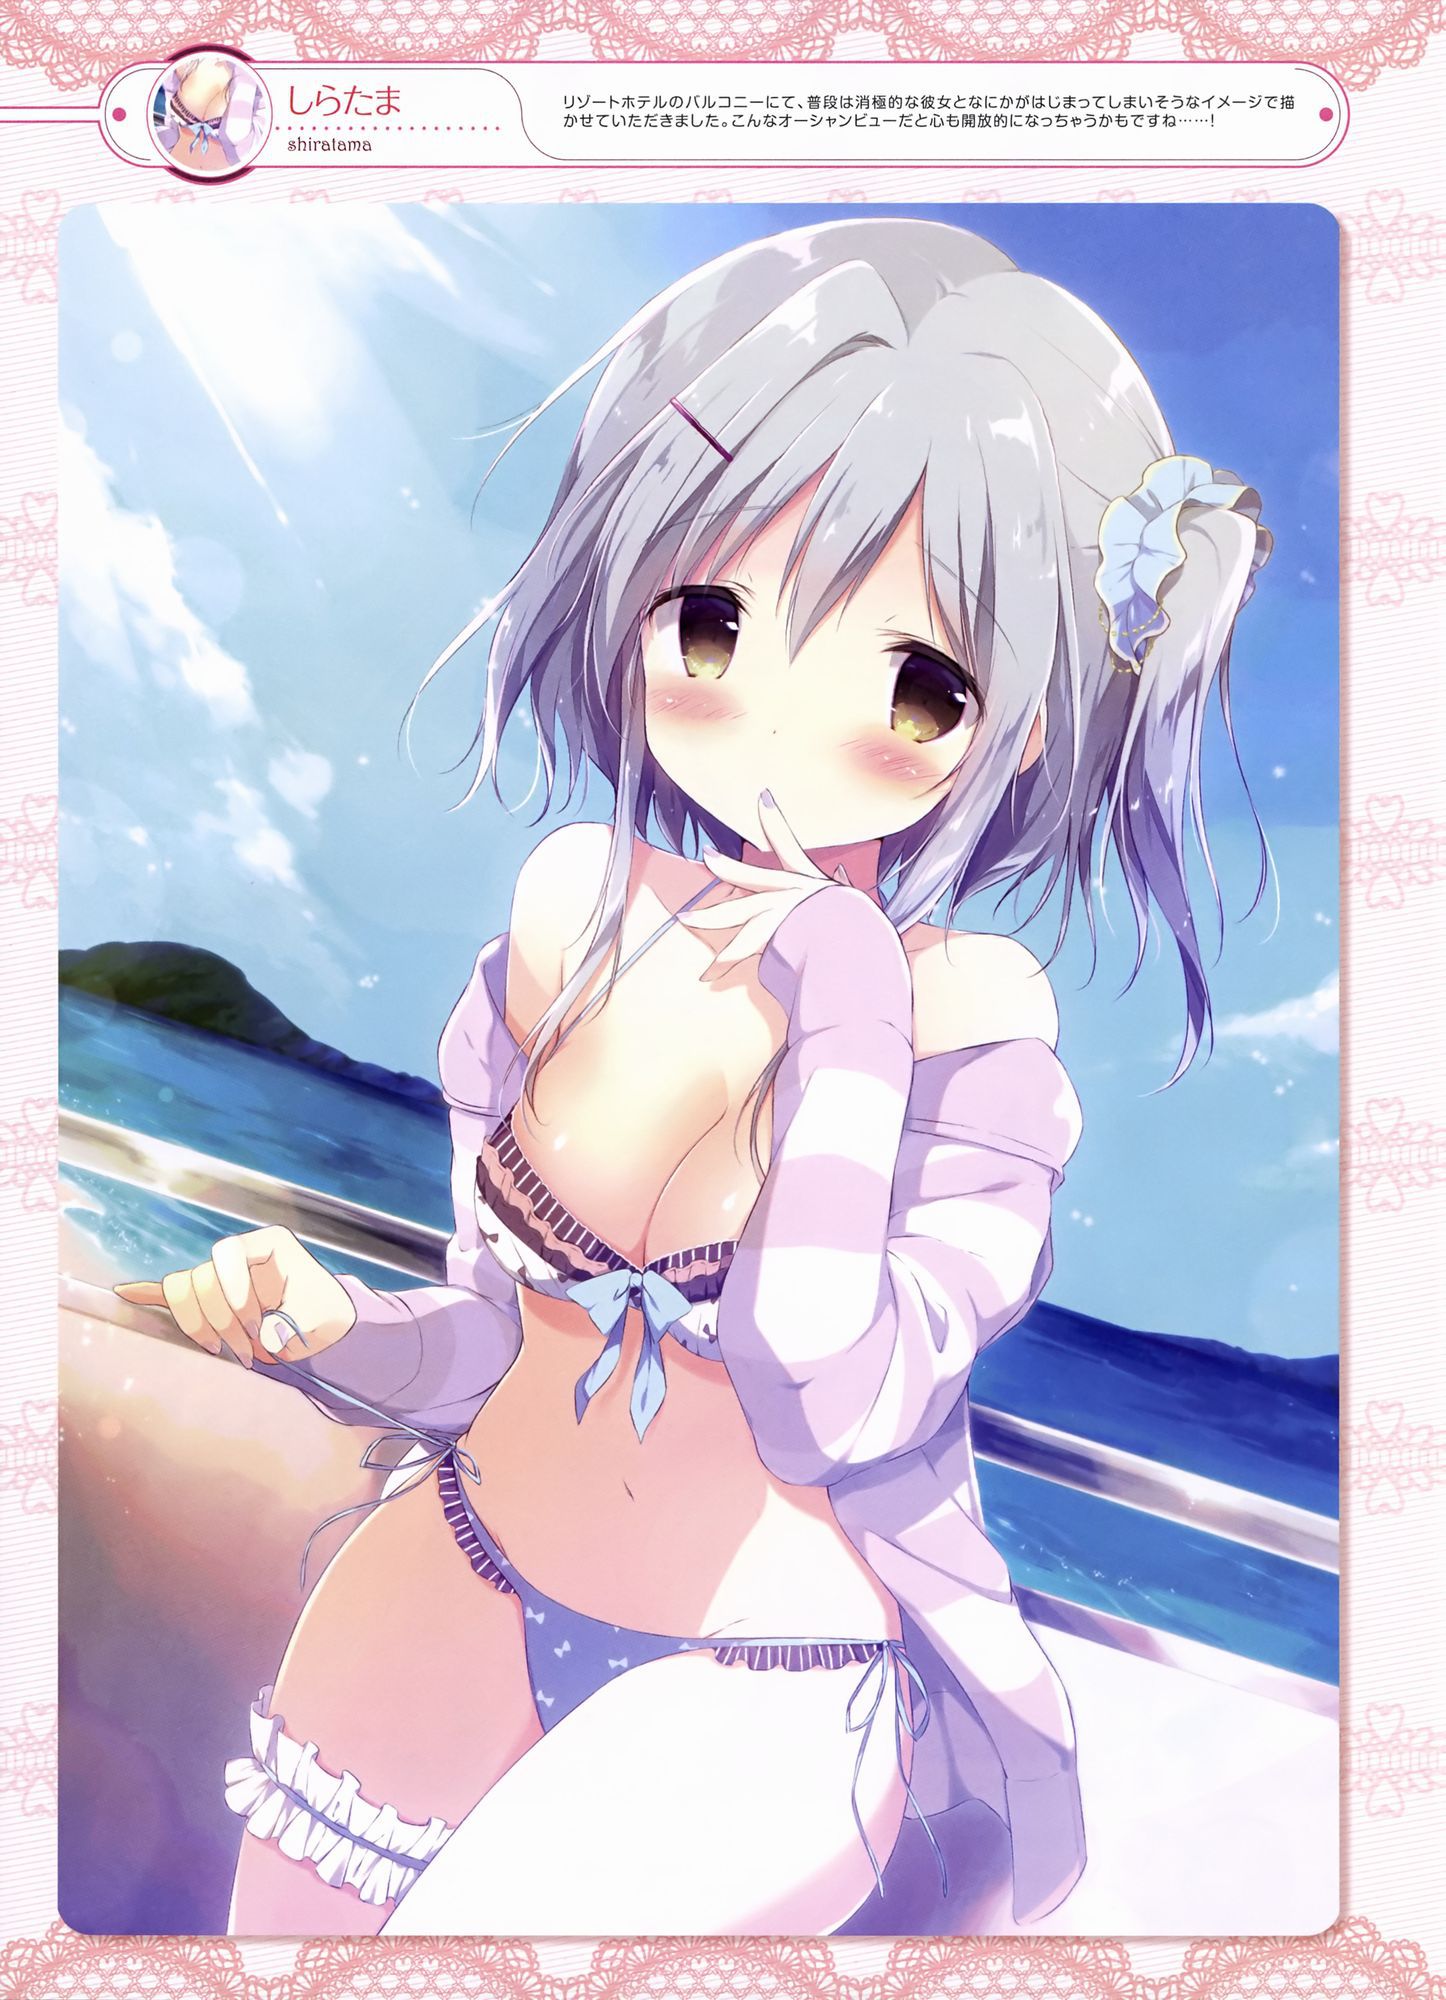 Select images of the swimsuit. 11